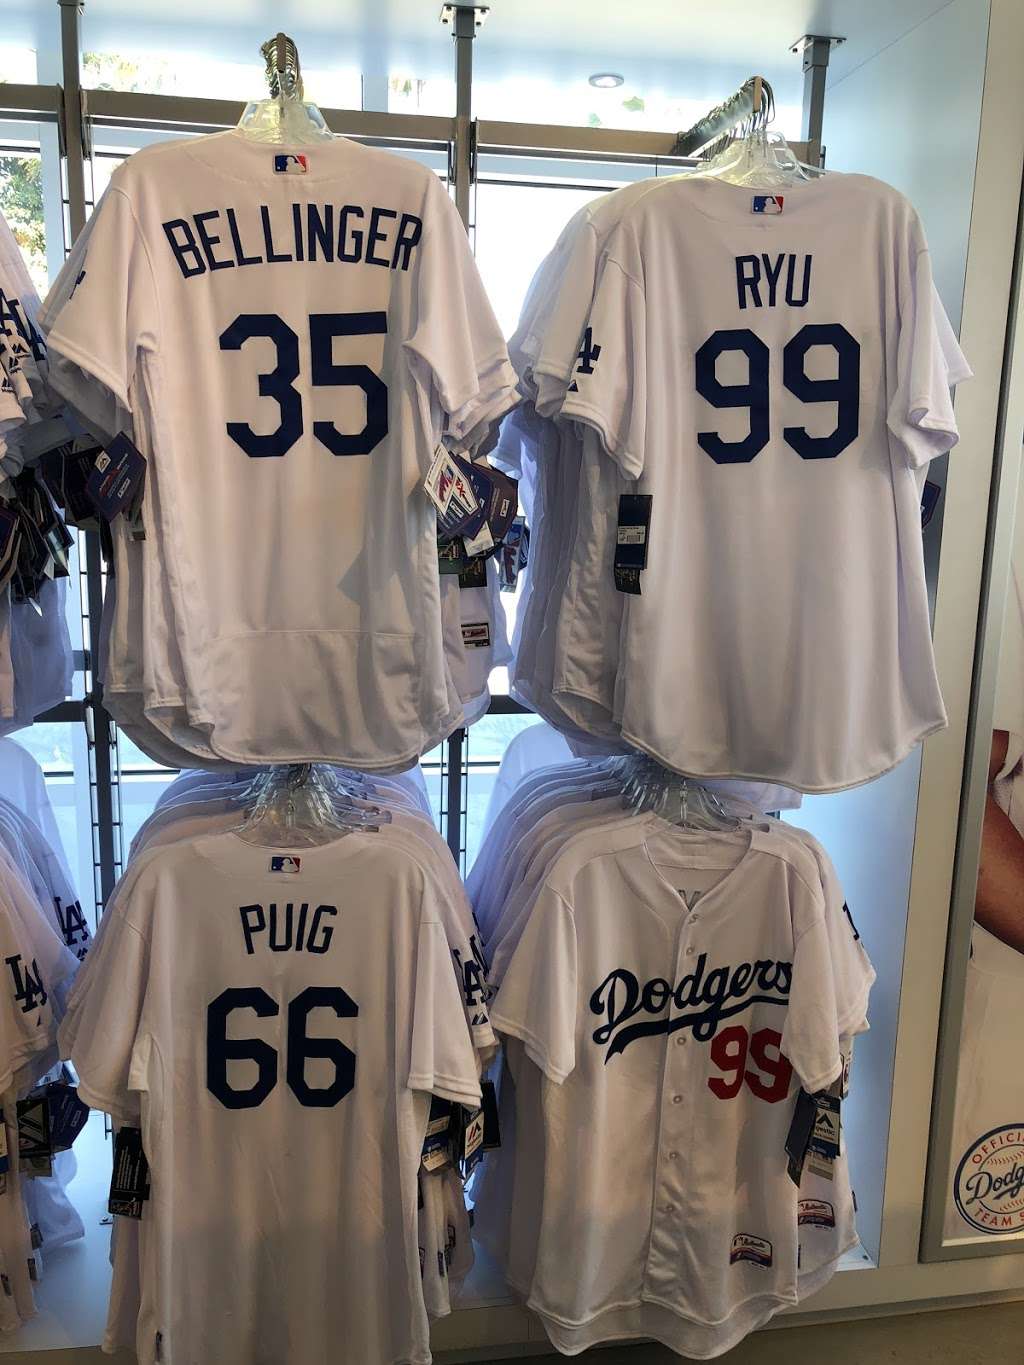 Dodgers Official Team Store | Los Angeles, CA 90012 | Phone: (323) 224-2621